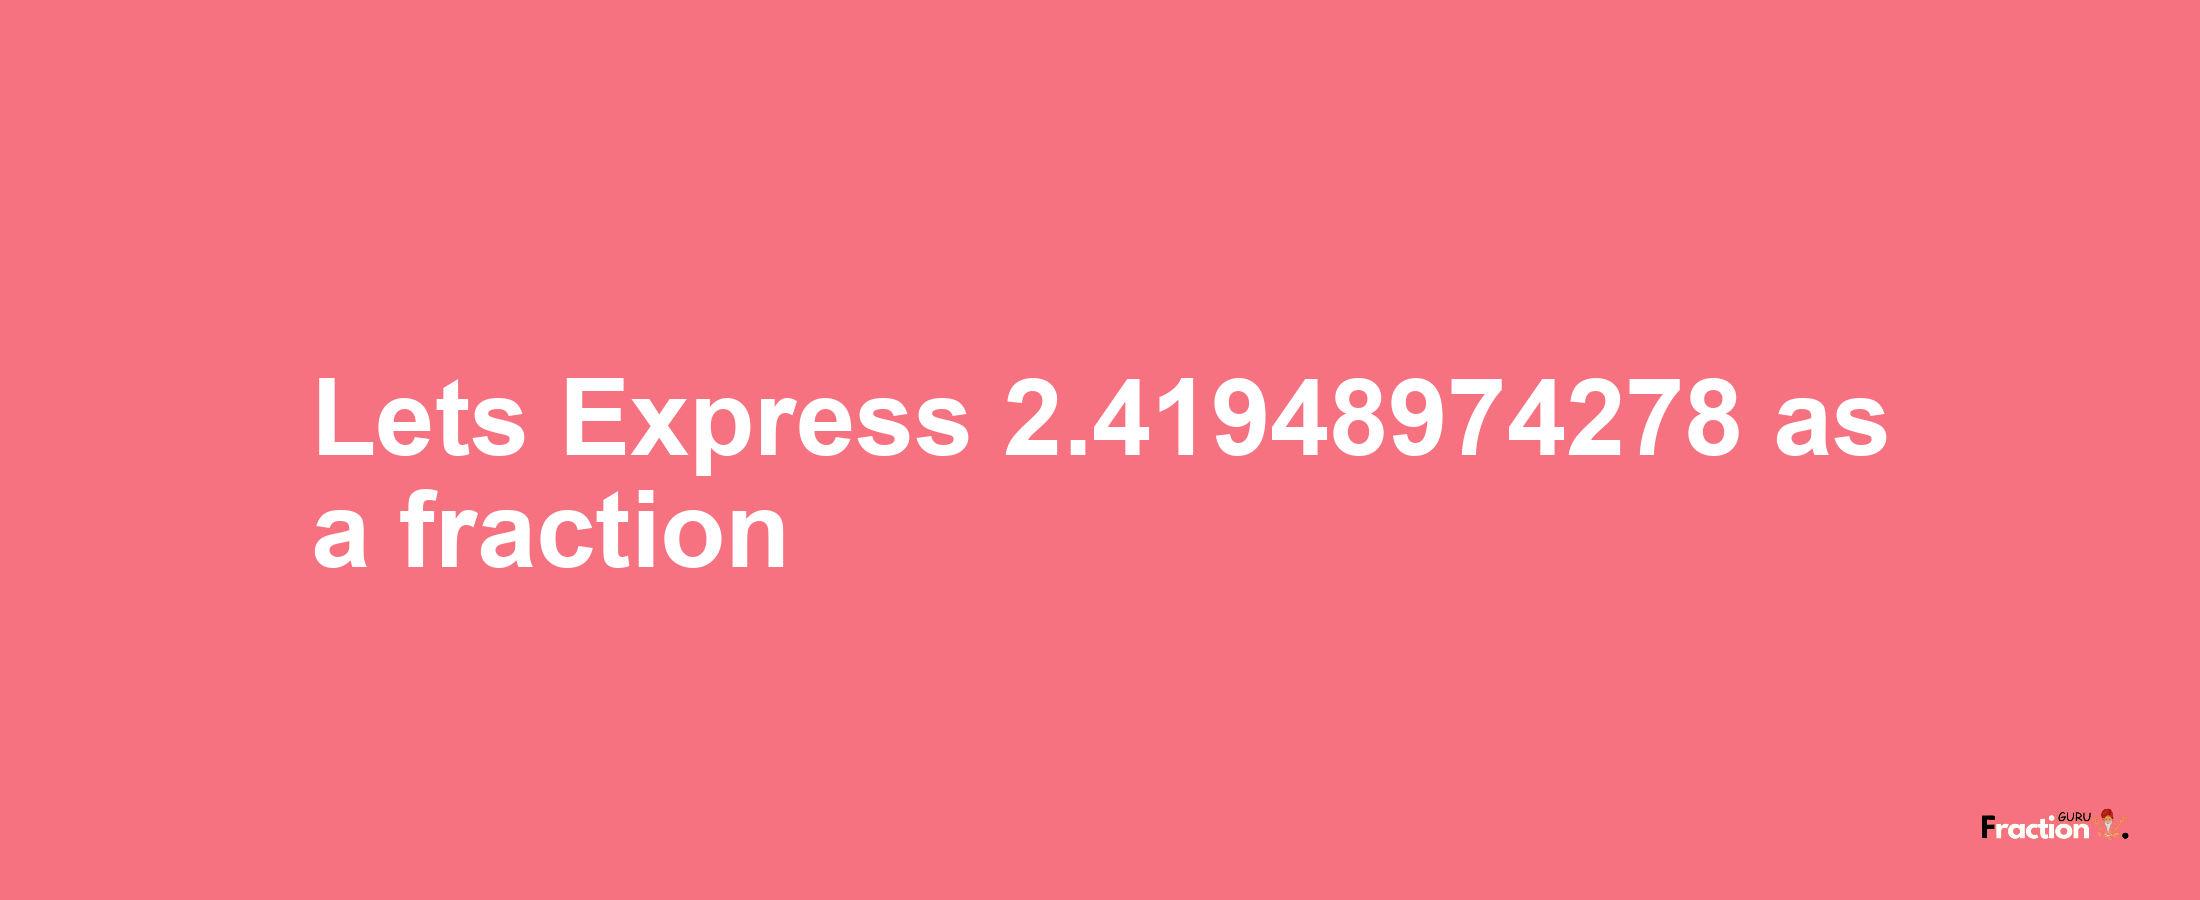 Lets Express 2.41948974278 as afraction